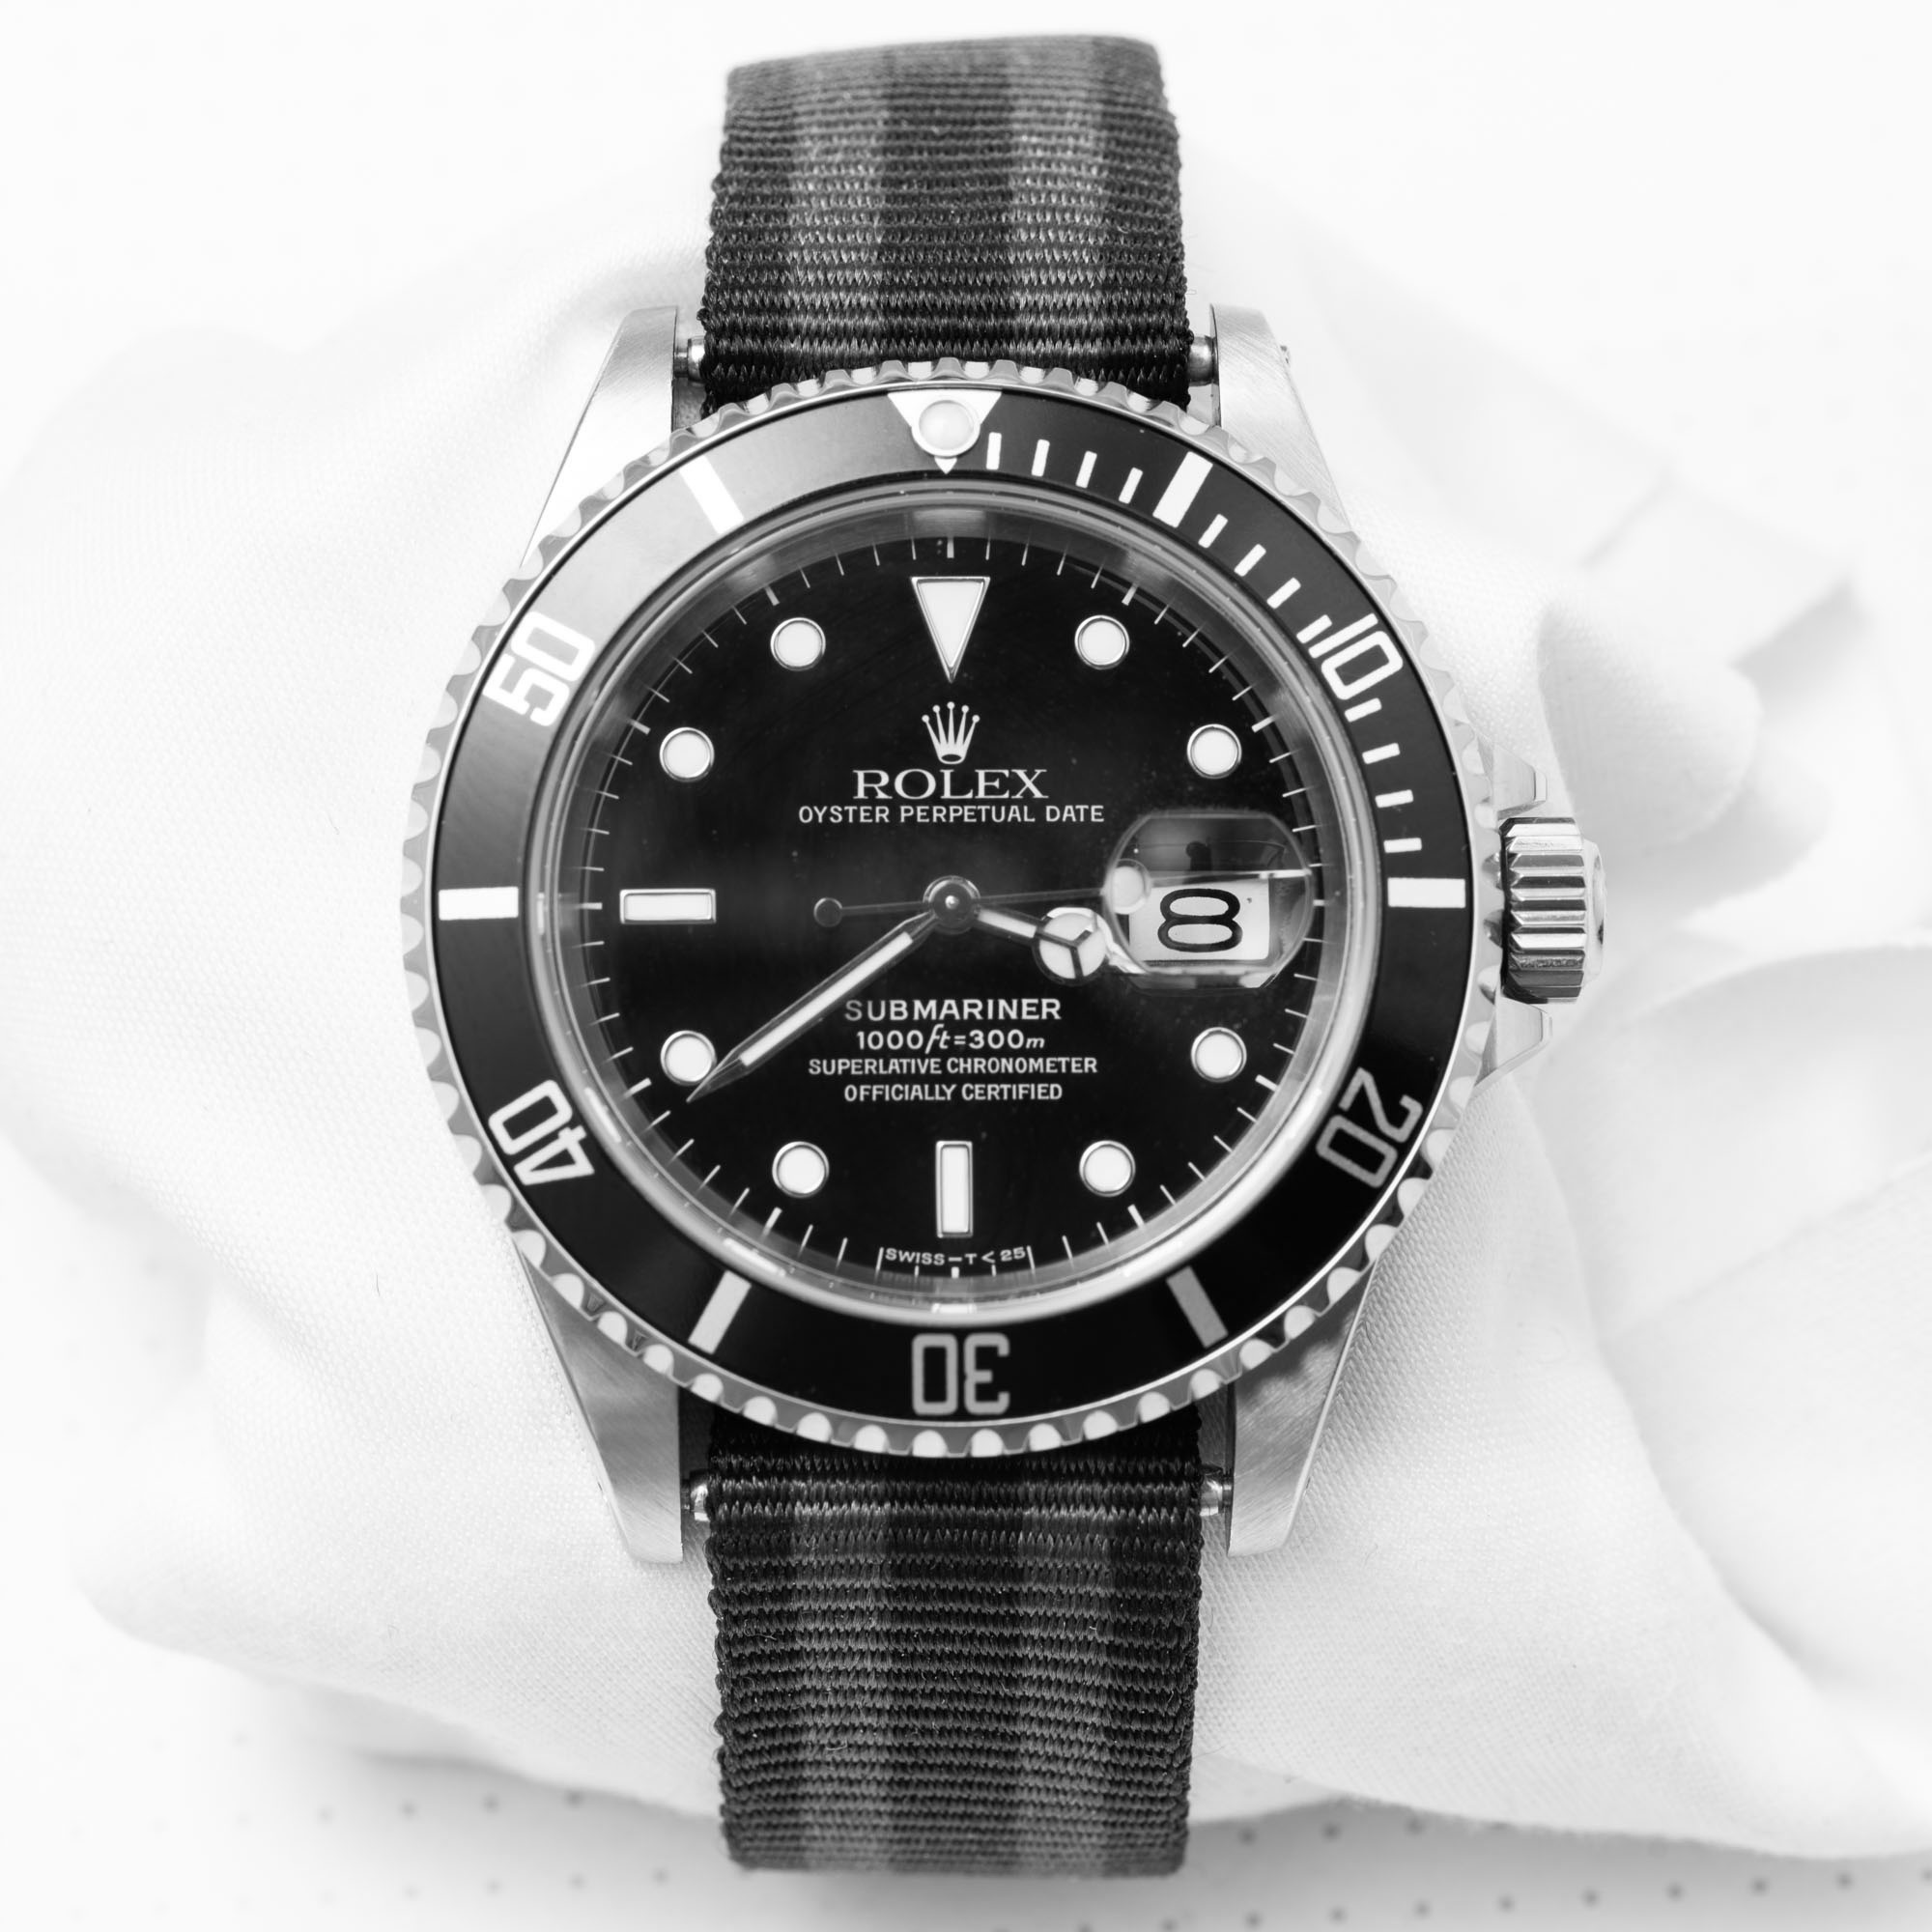 roman Start Svig Art Tribute To Sean Connery & His Bond Rolex Submariner 6538: New  Horological Artwork On The aBlogtoWatch Store | aBlogtoWatch